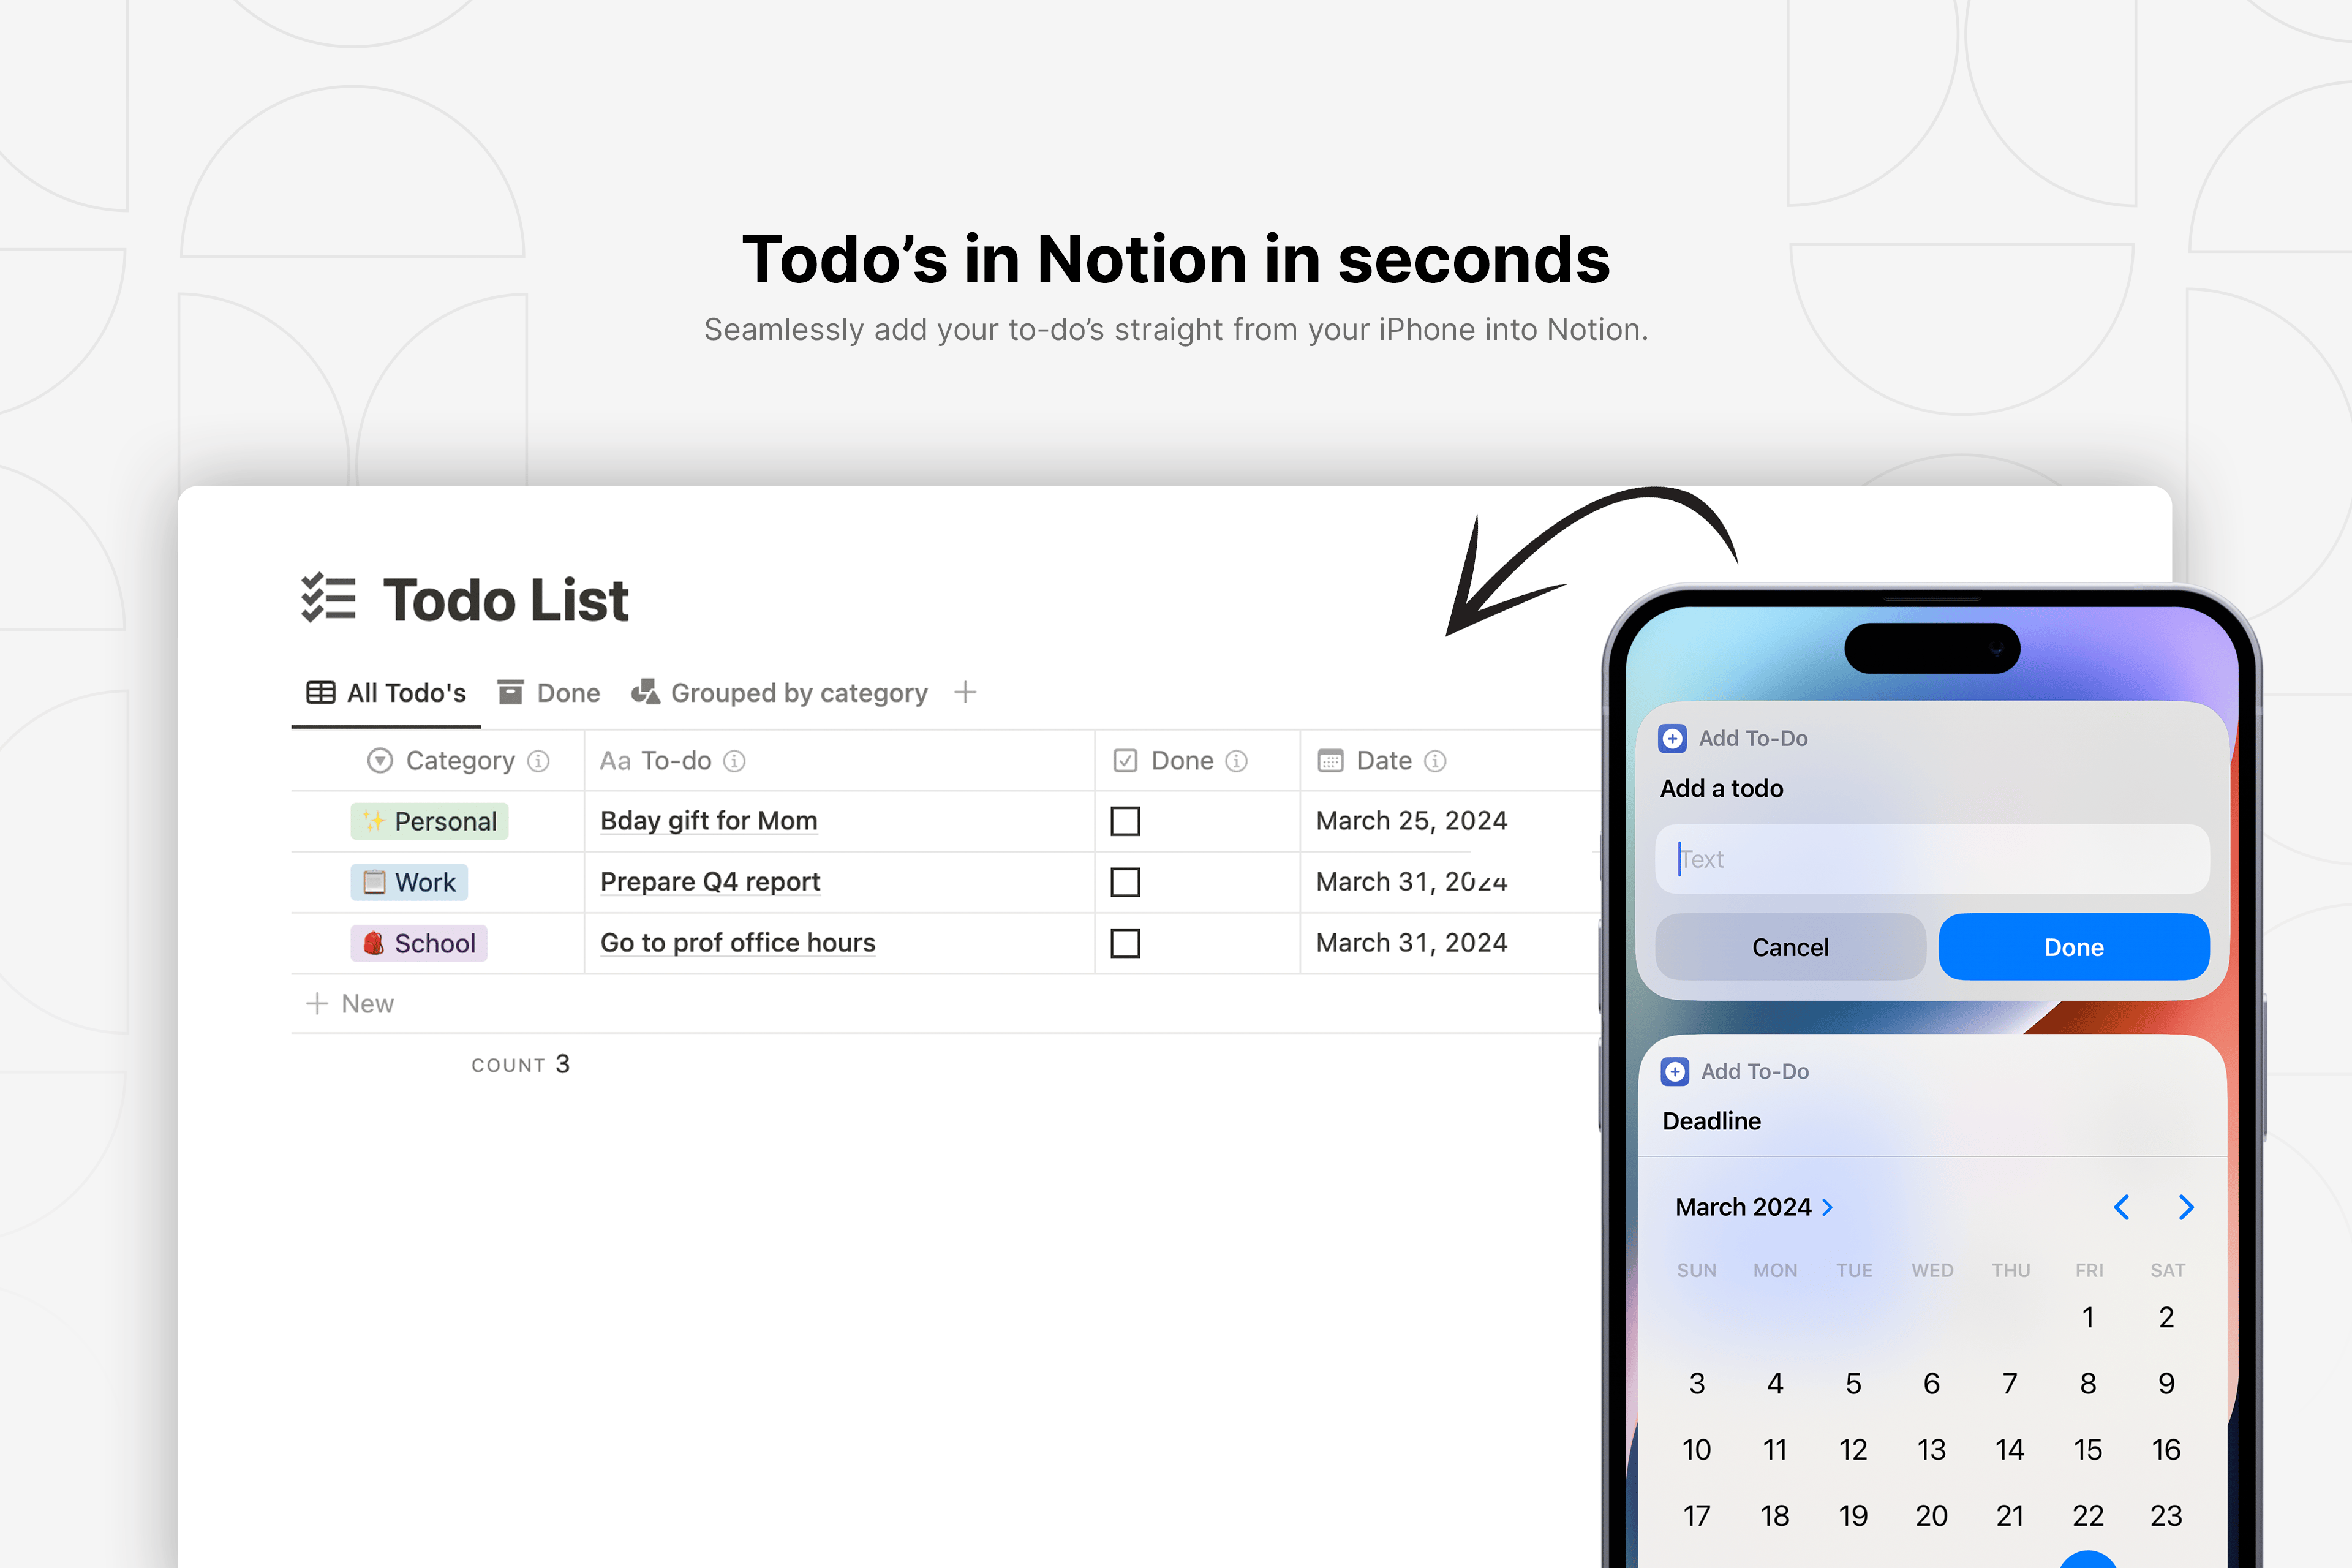 Adding todo's to Notion is finally seamless! This Notion template makes it super easy to add todo's straight from your iPhone and send them to the todo list database.